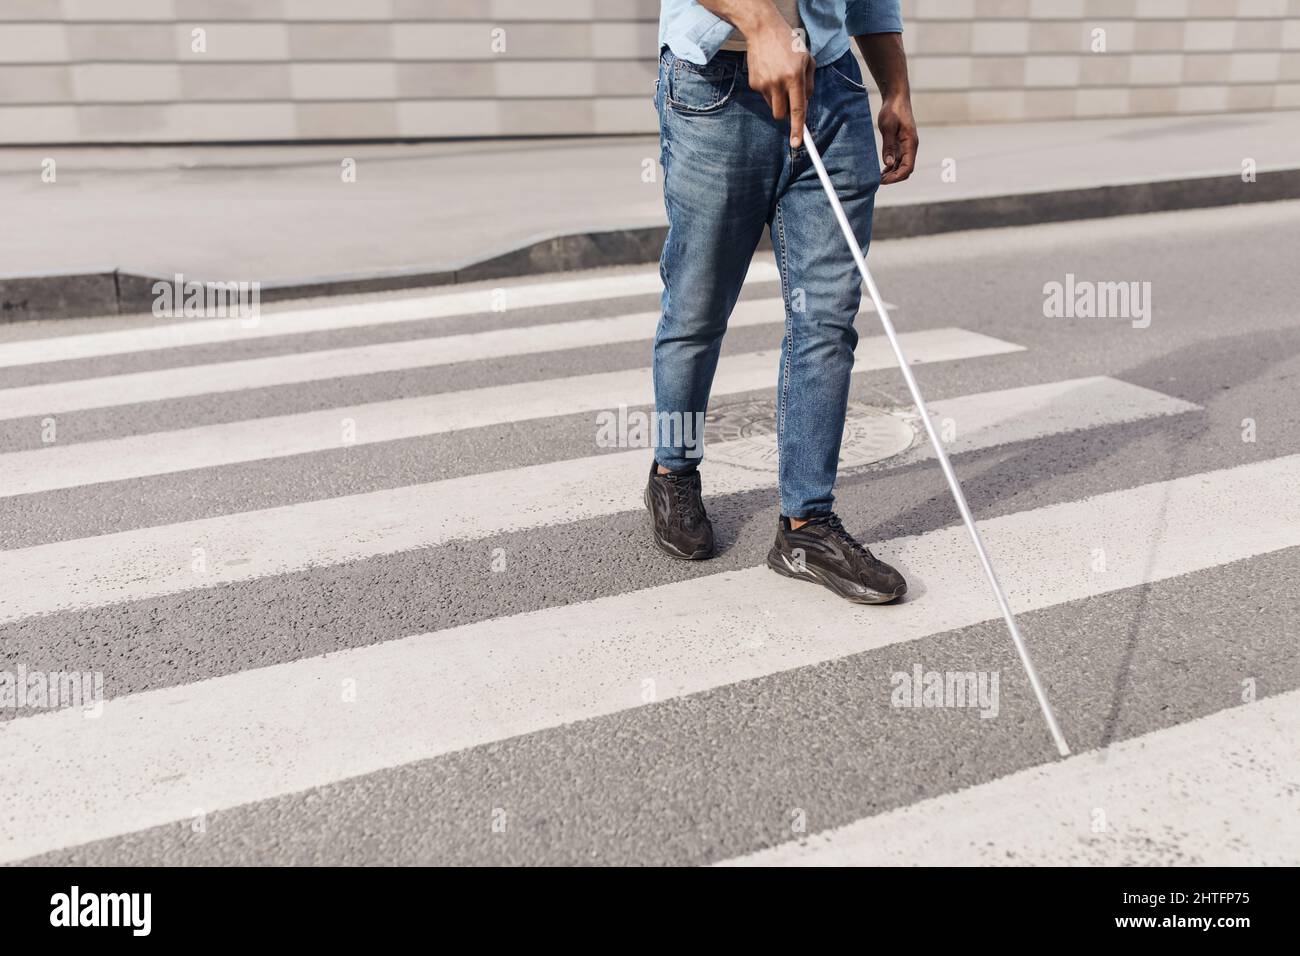 Unrecognizable young black man with vision disability walking across city street, using walking cane outdoors, copy space Stock Photo